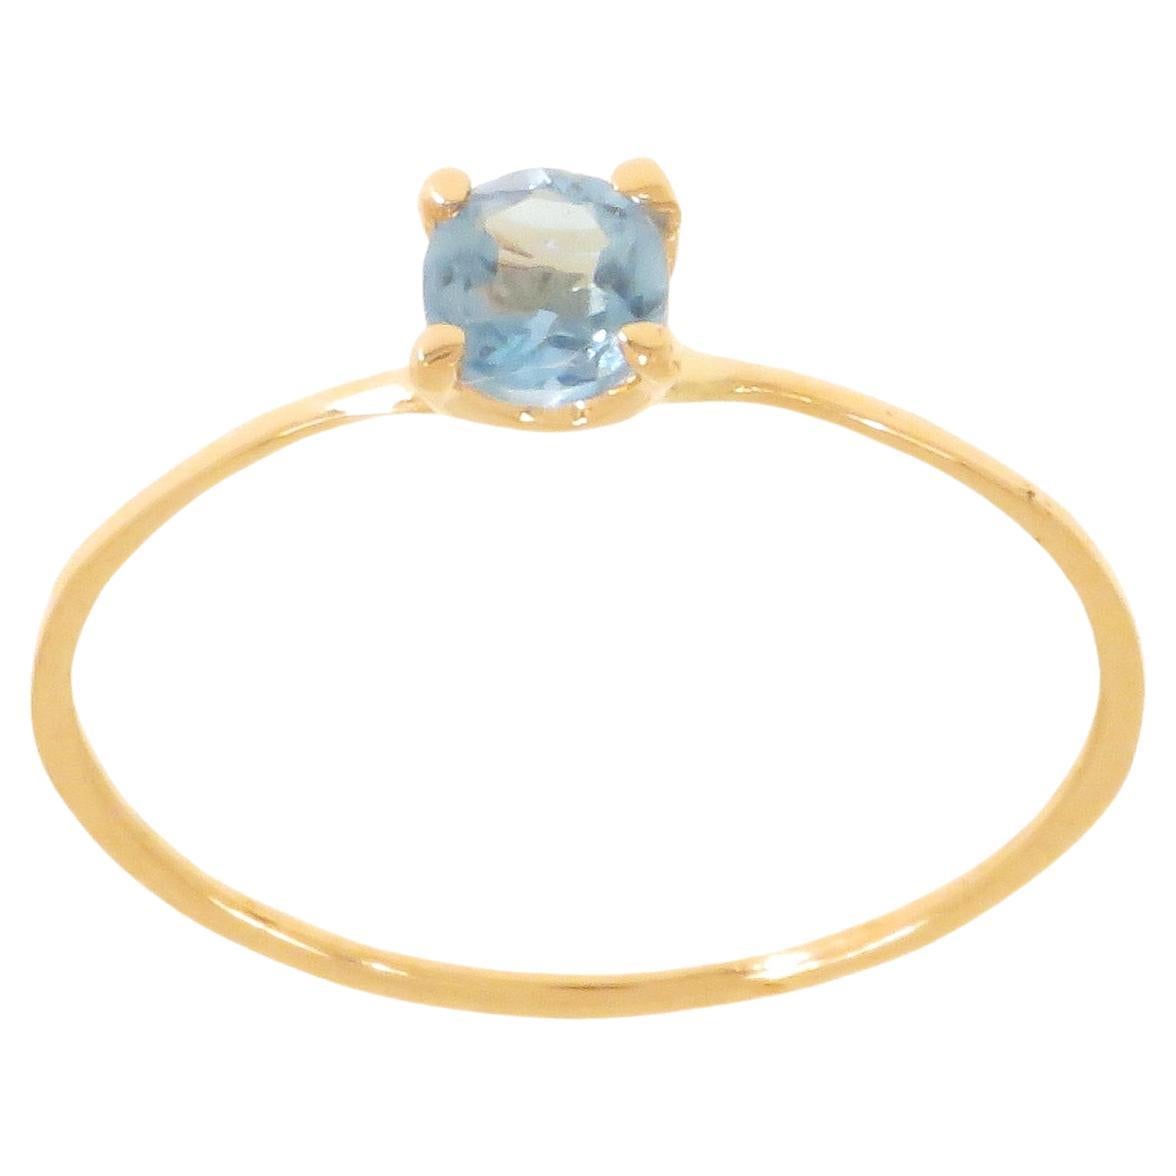 Brilliant Cut Blue topaz 9 Karat Rose Gold Ring Handcrafted in, Italy